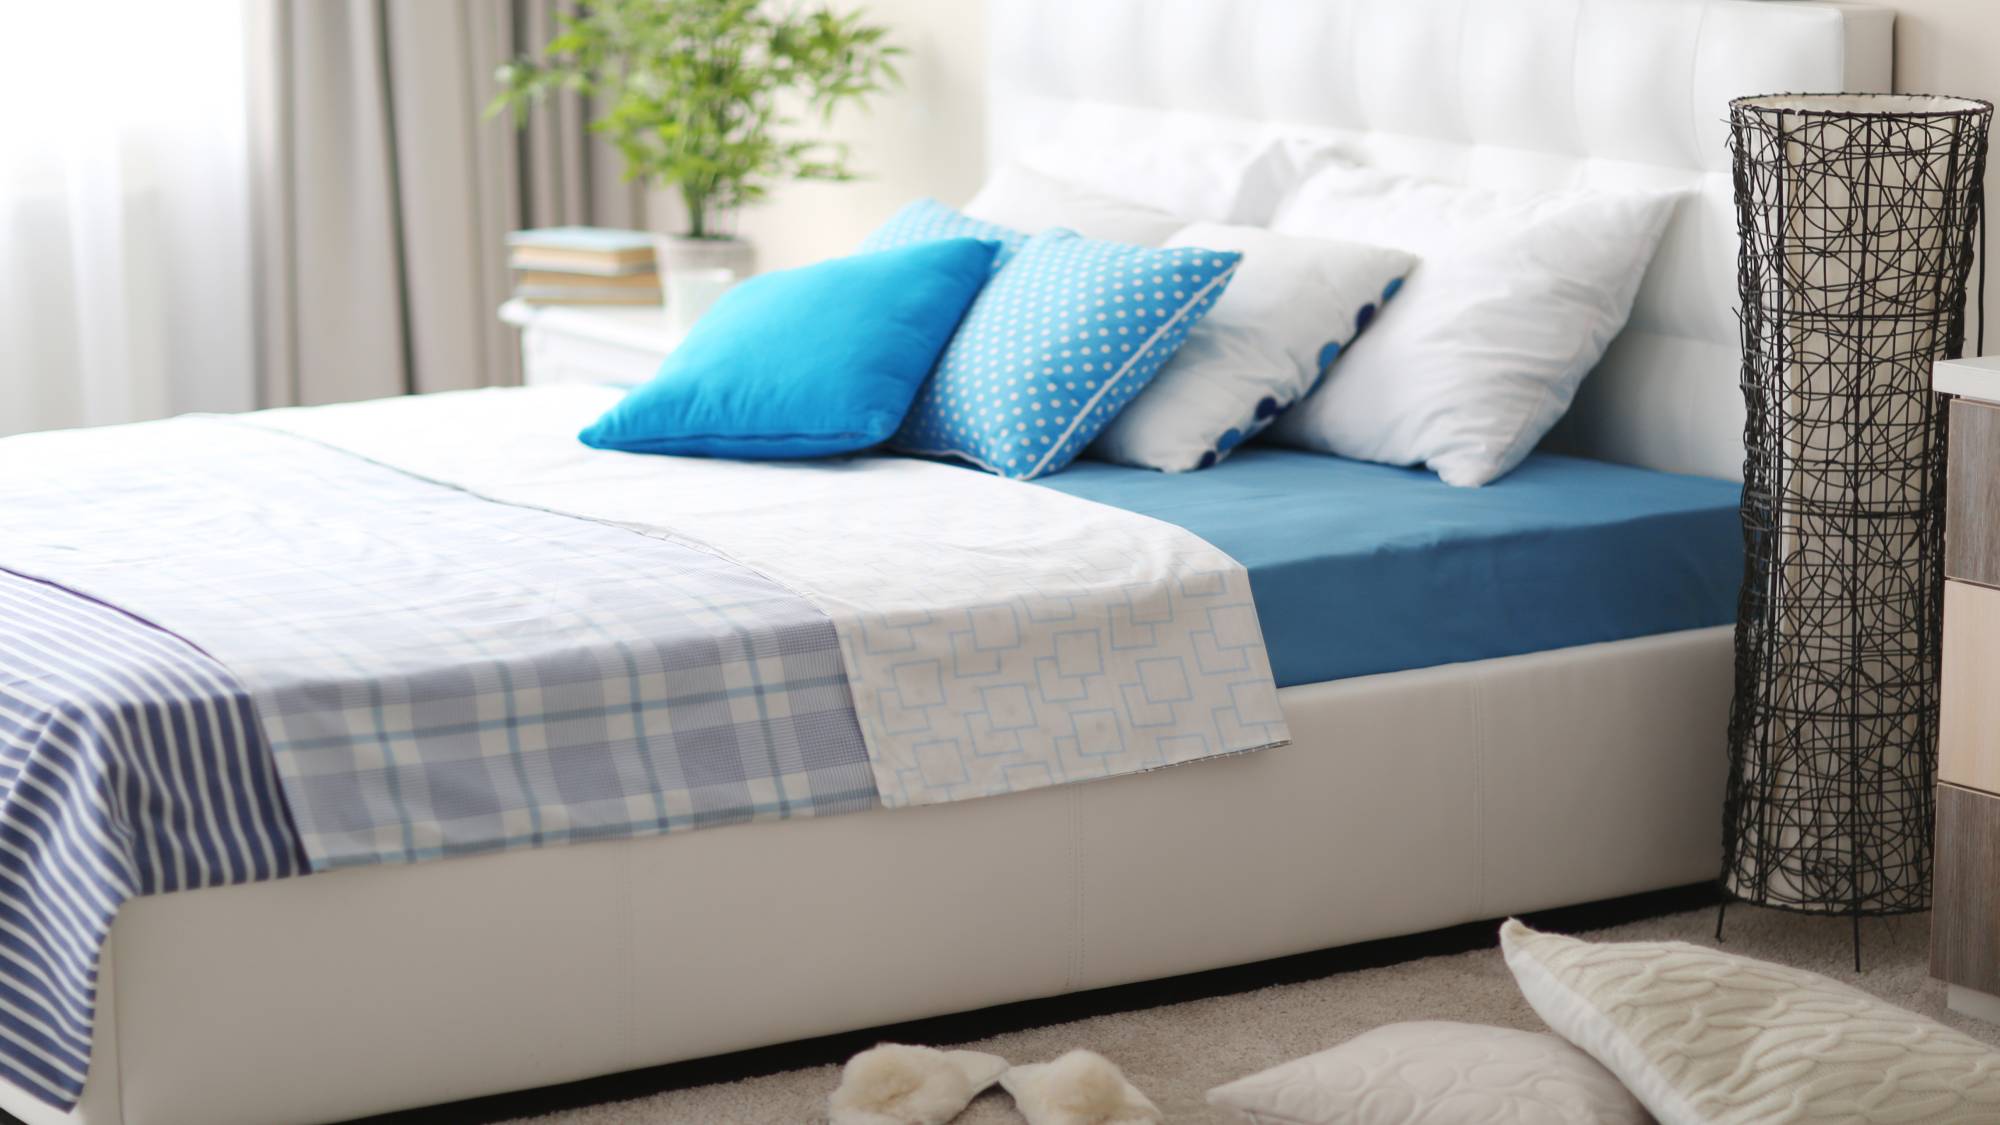 Best mattress sale in May 2022 — deals on today’s top brands